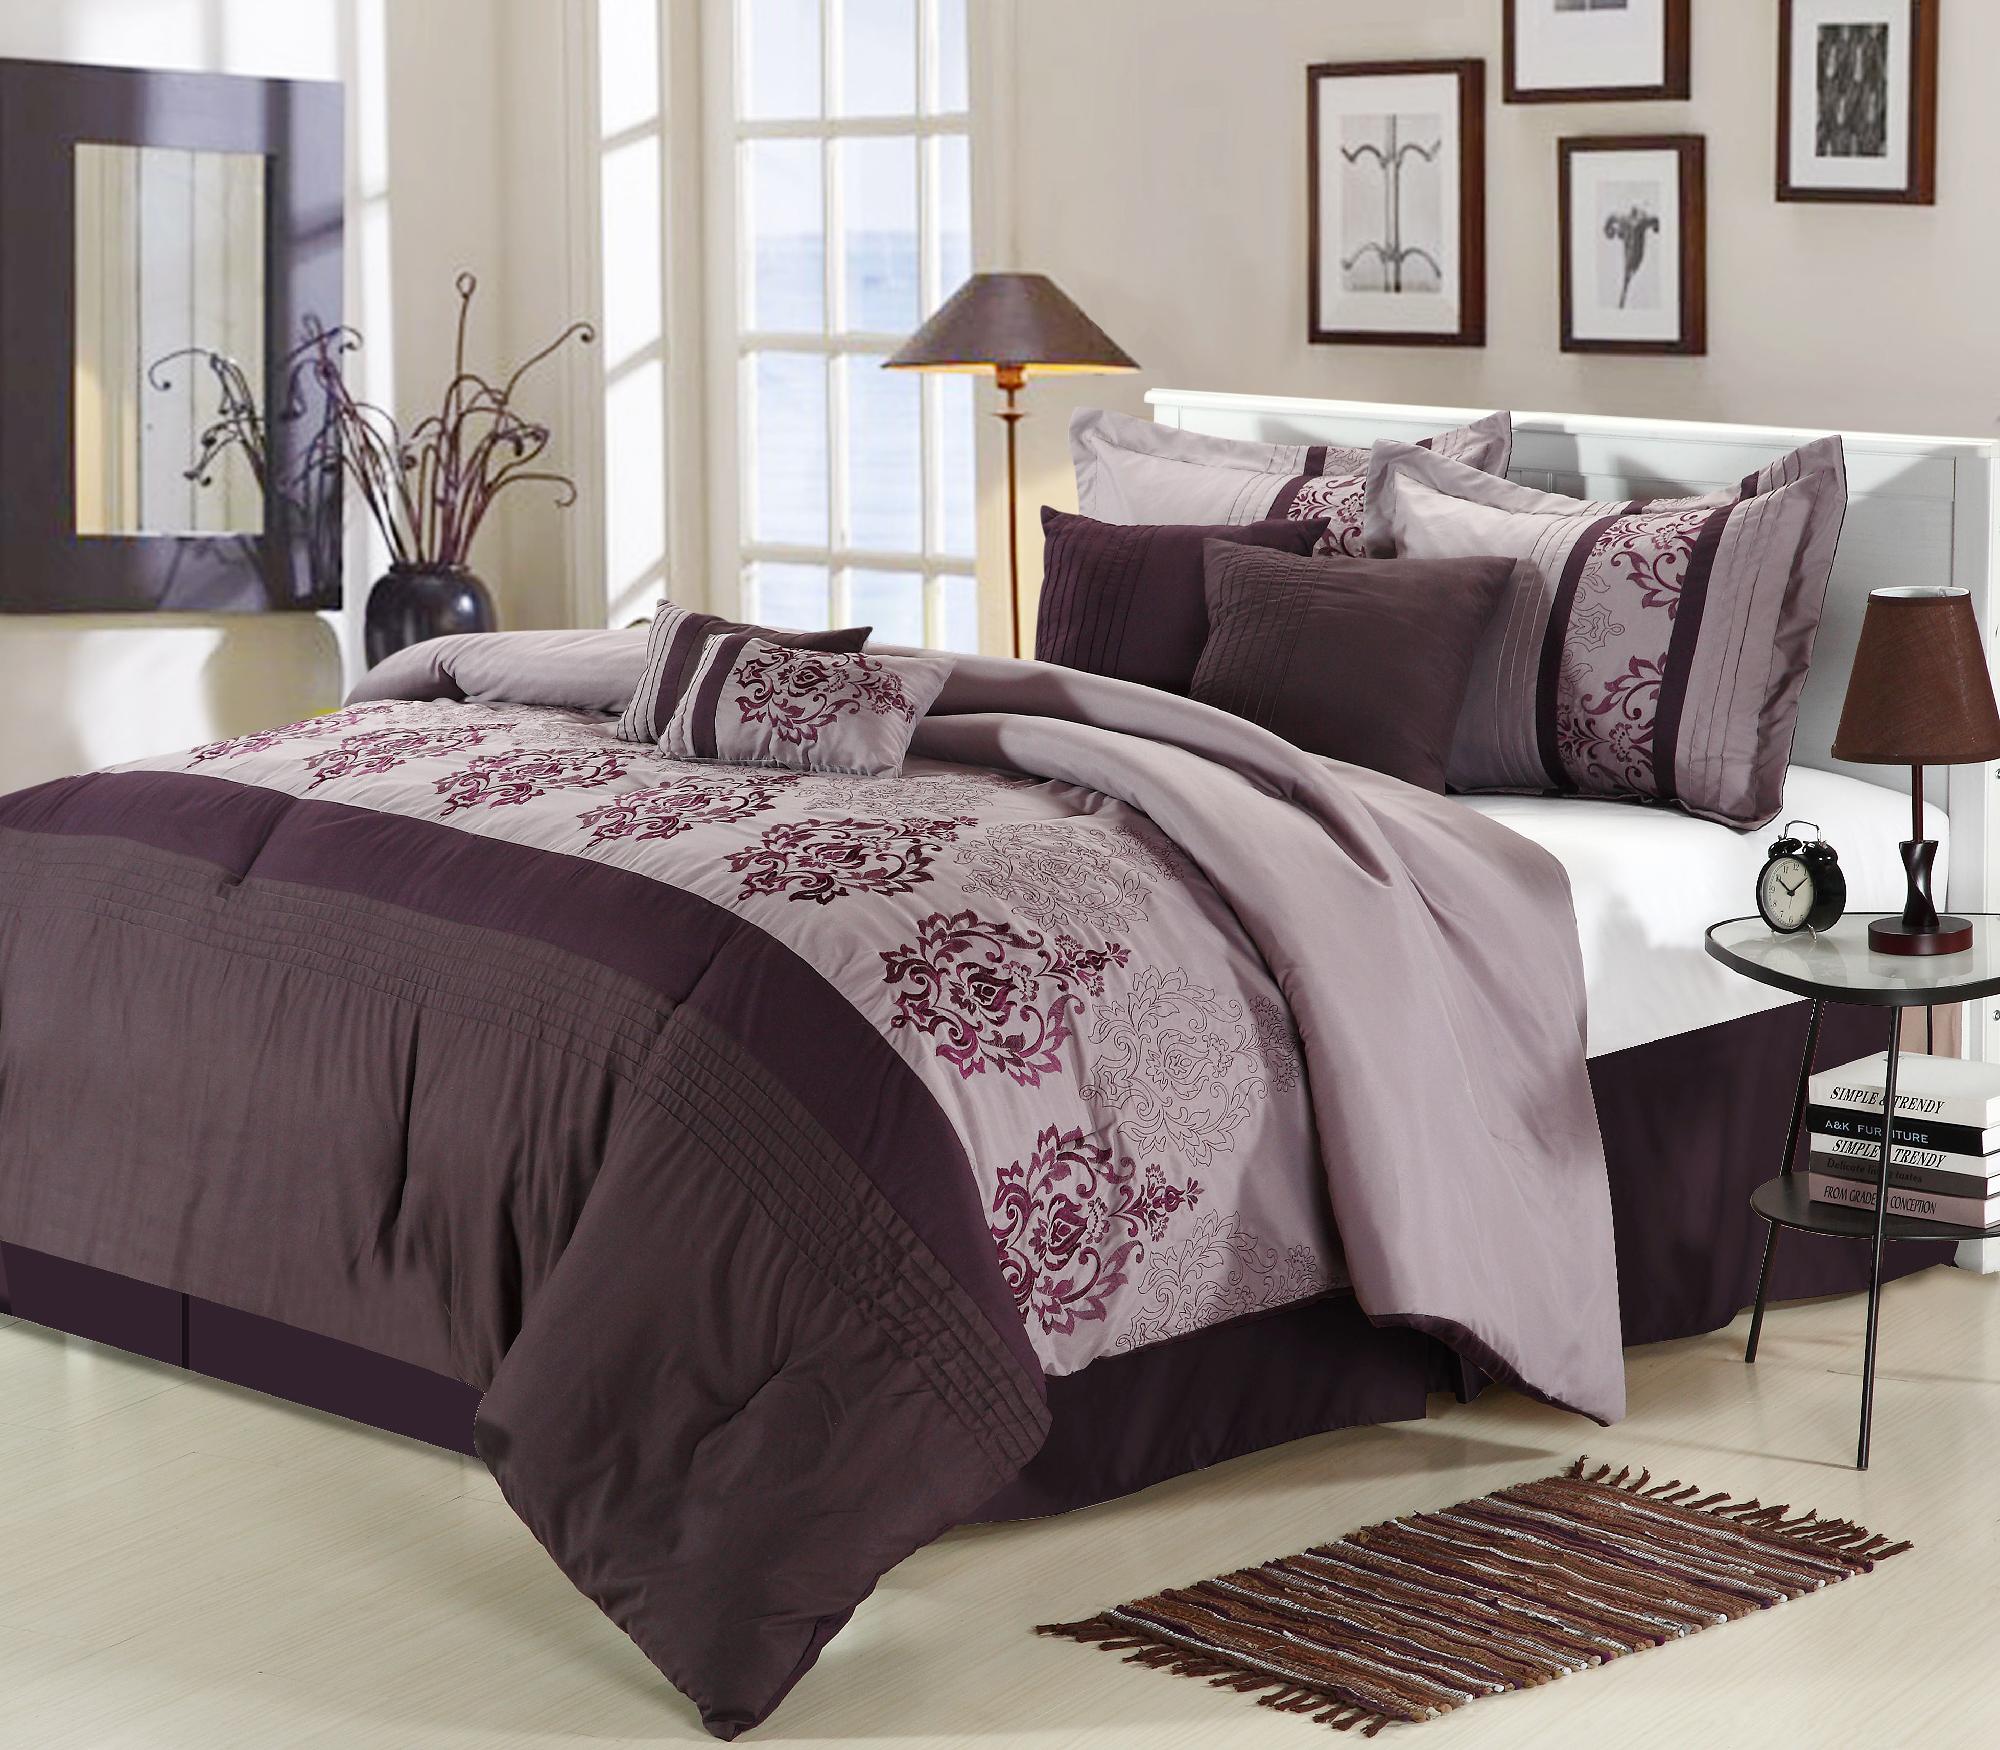 Chic Home Renaissance 8 pc Embroidered Comforter Set